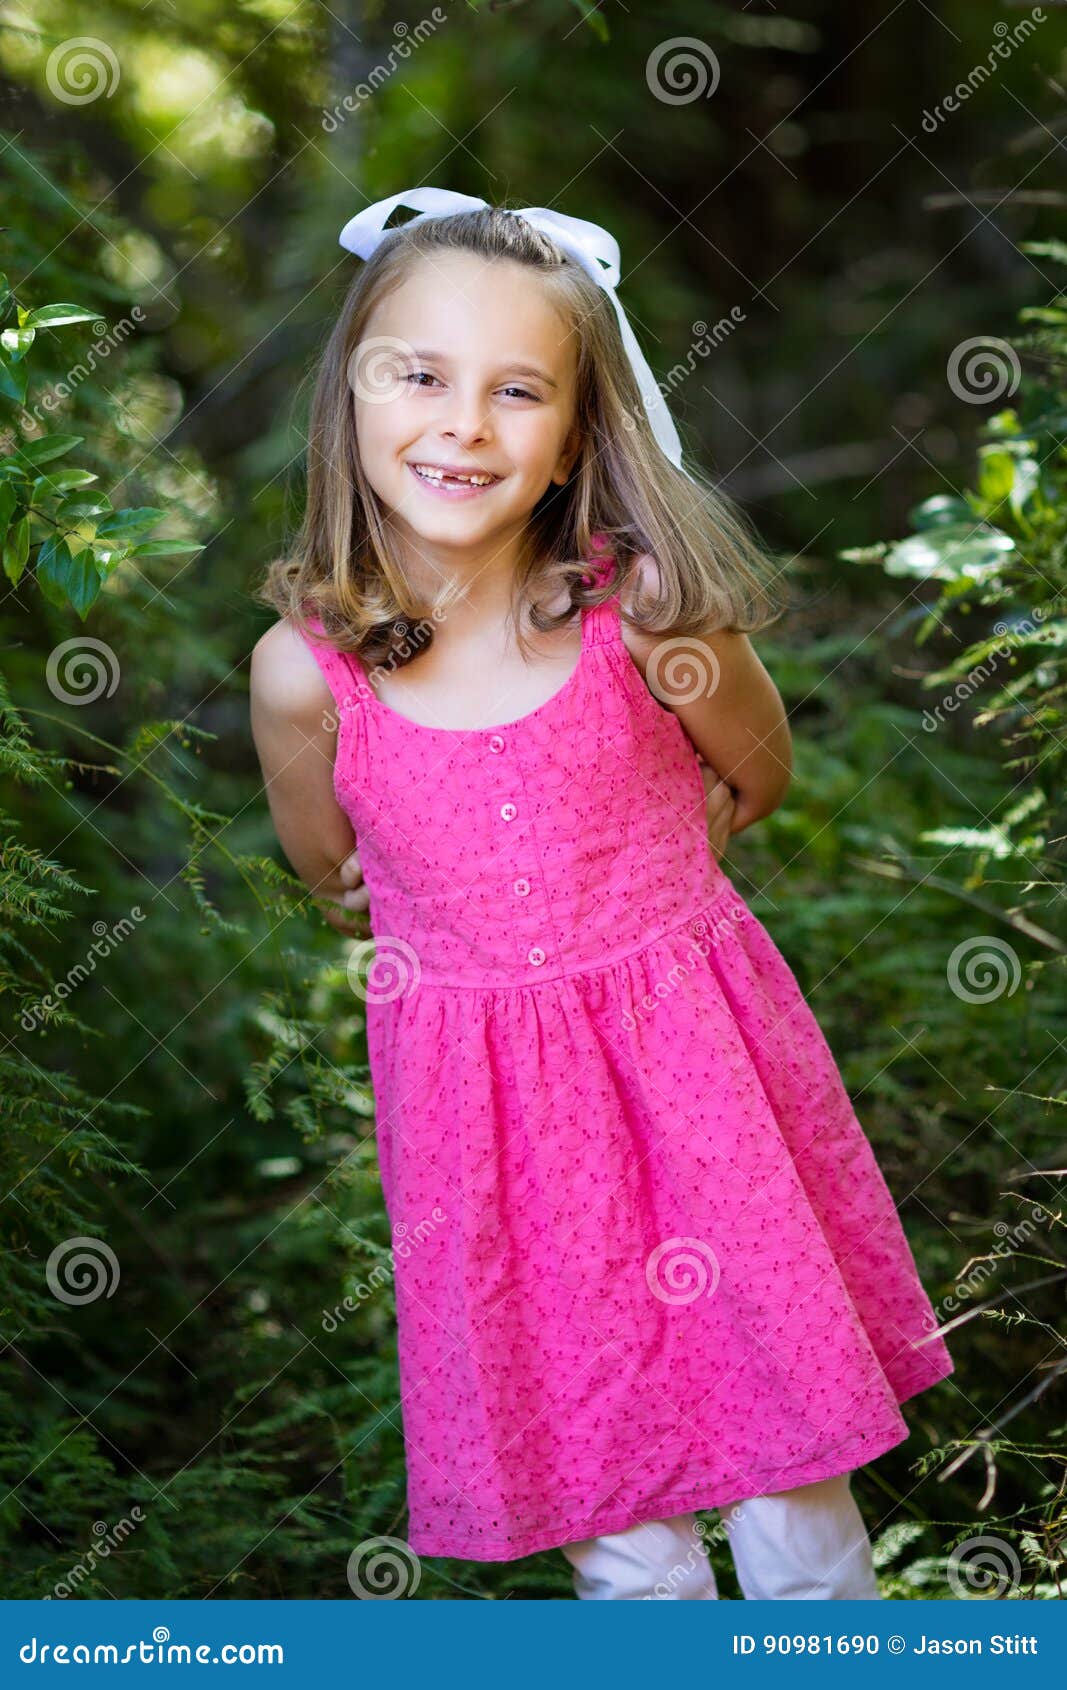 Smiling Little Girl stock photo. Image of child, cute - 90981690